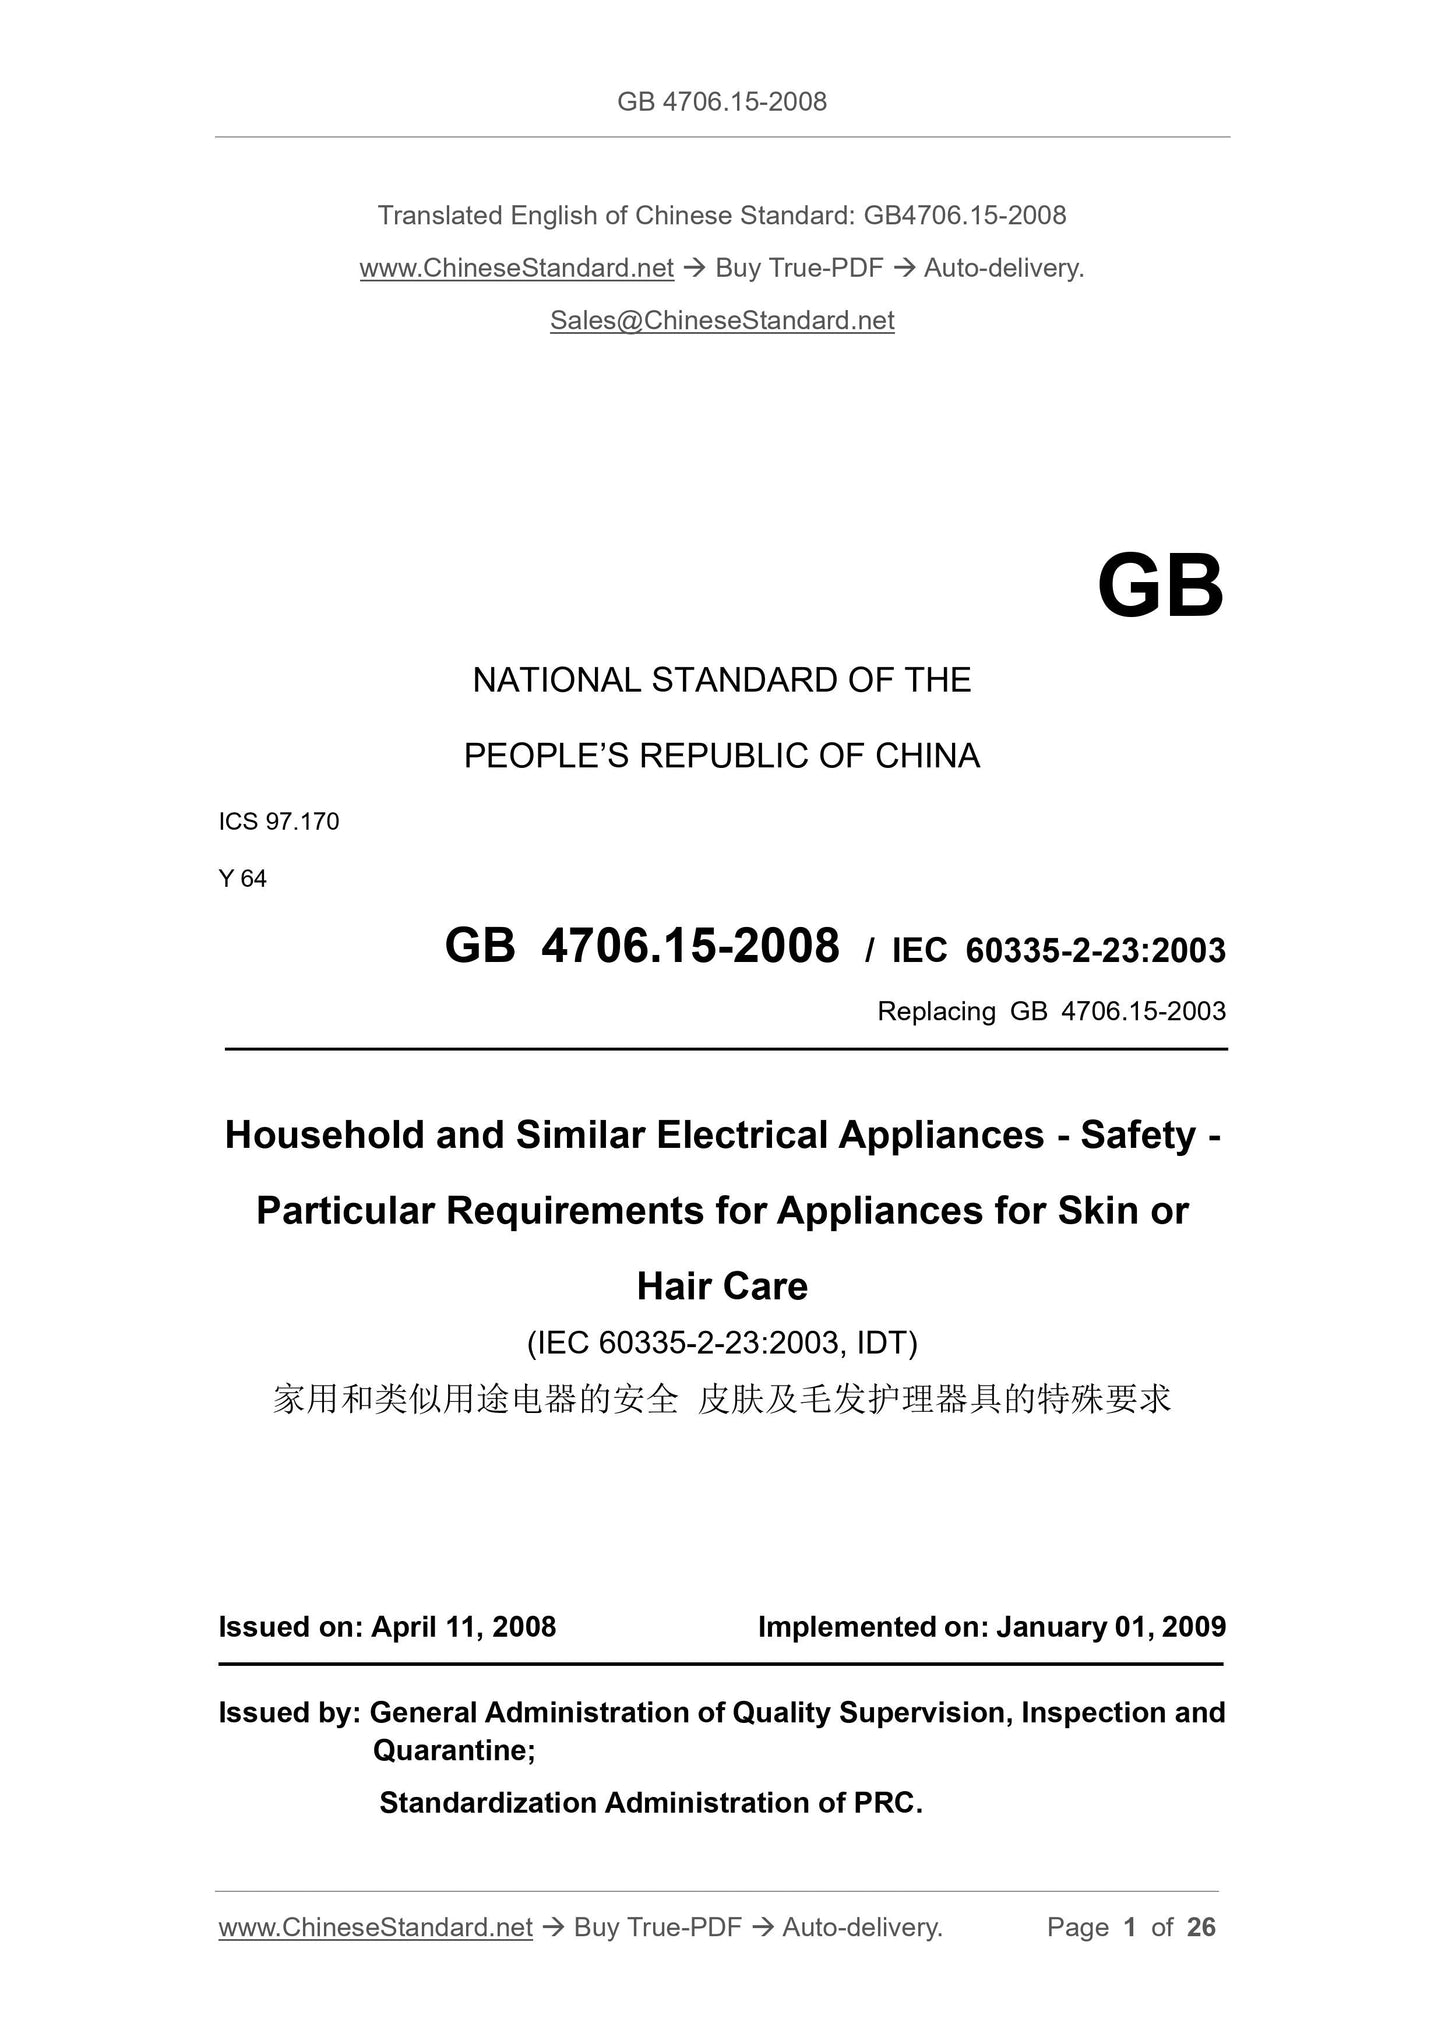 GB 4706.15-2008 Page 1